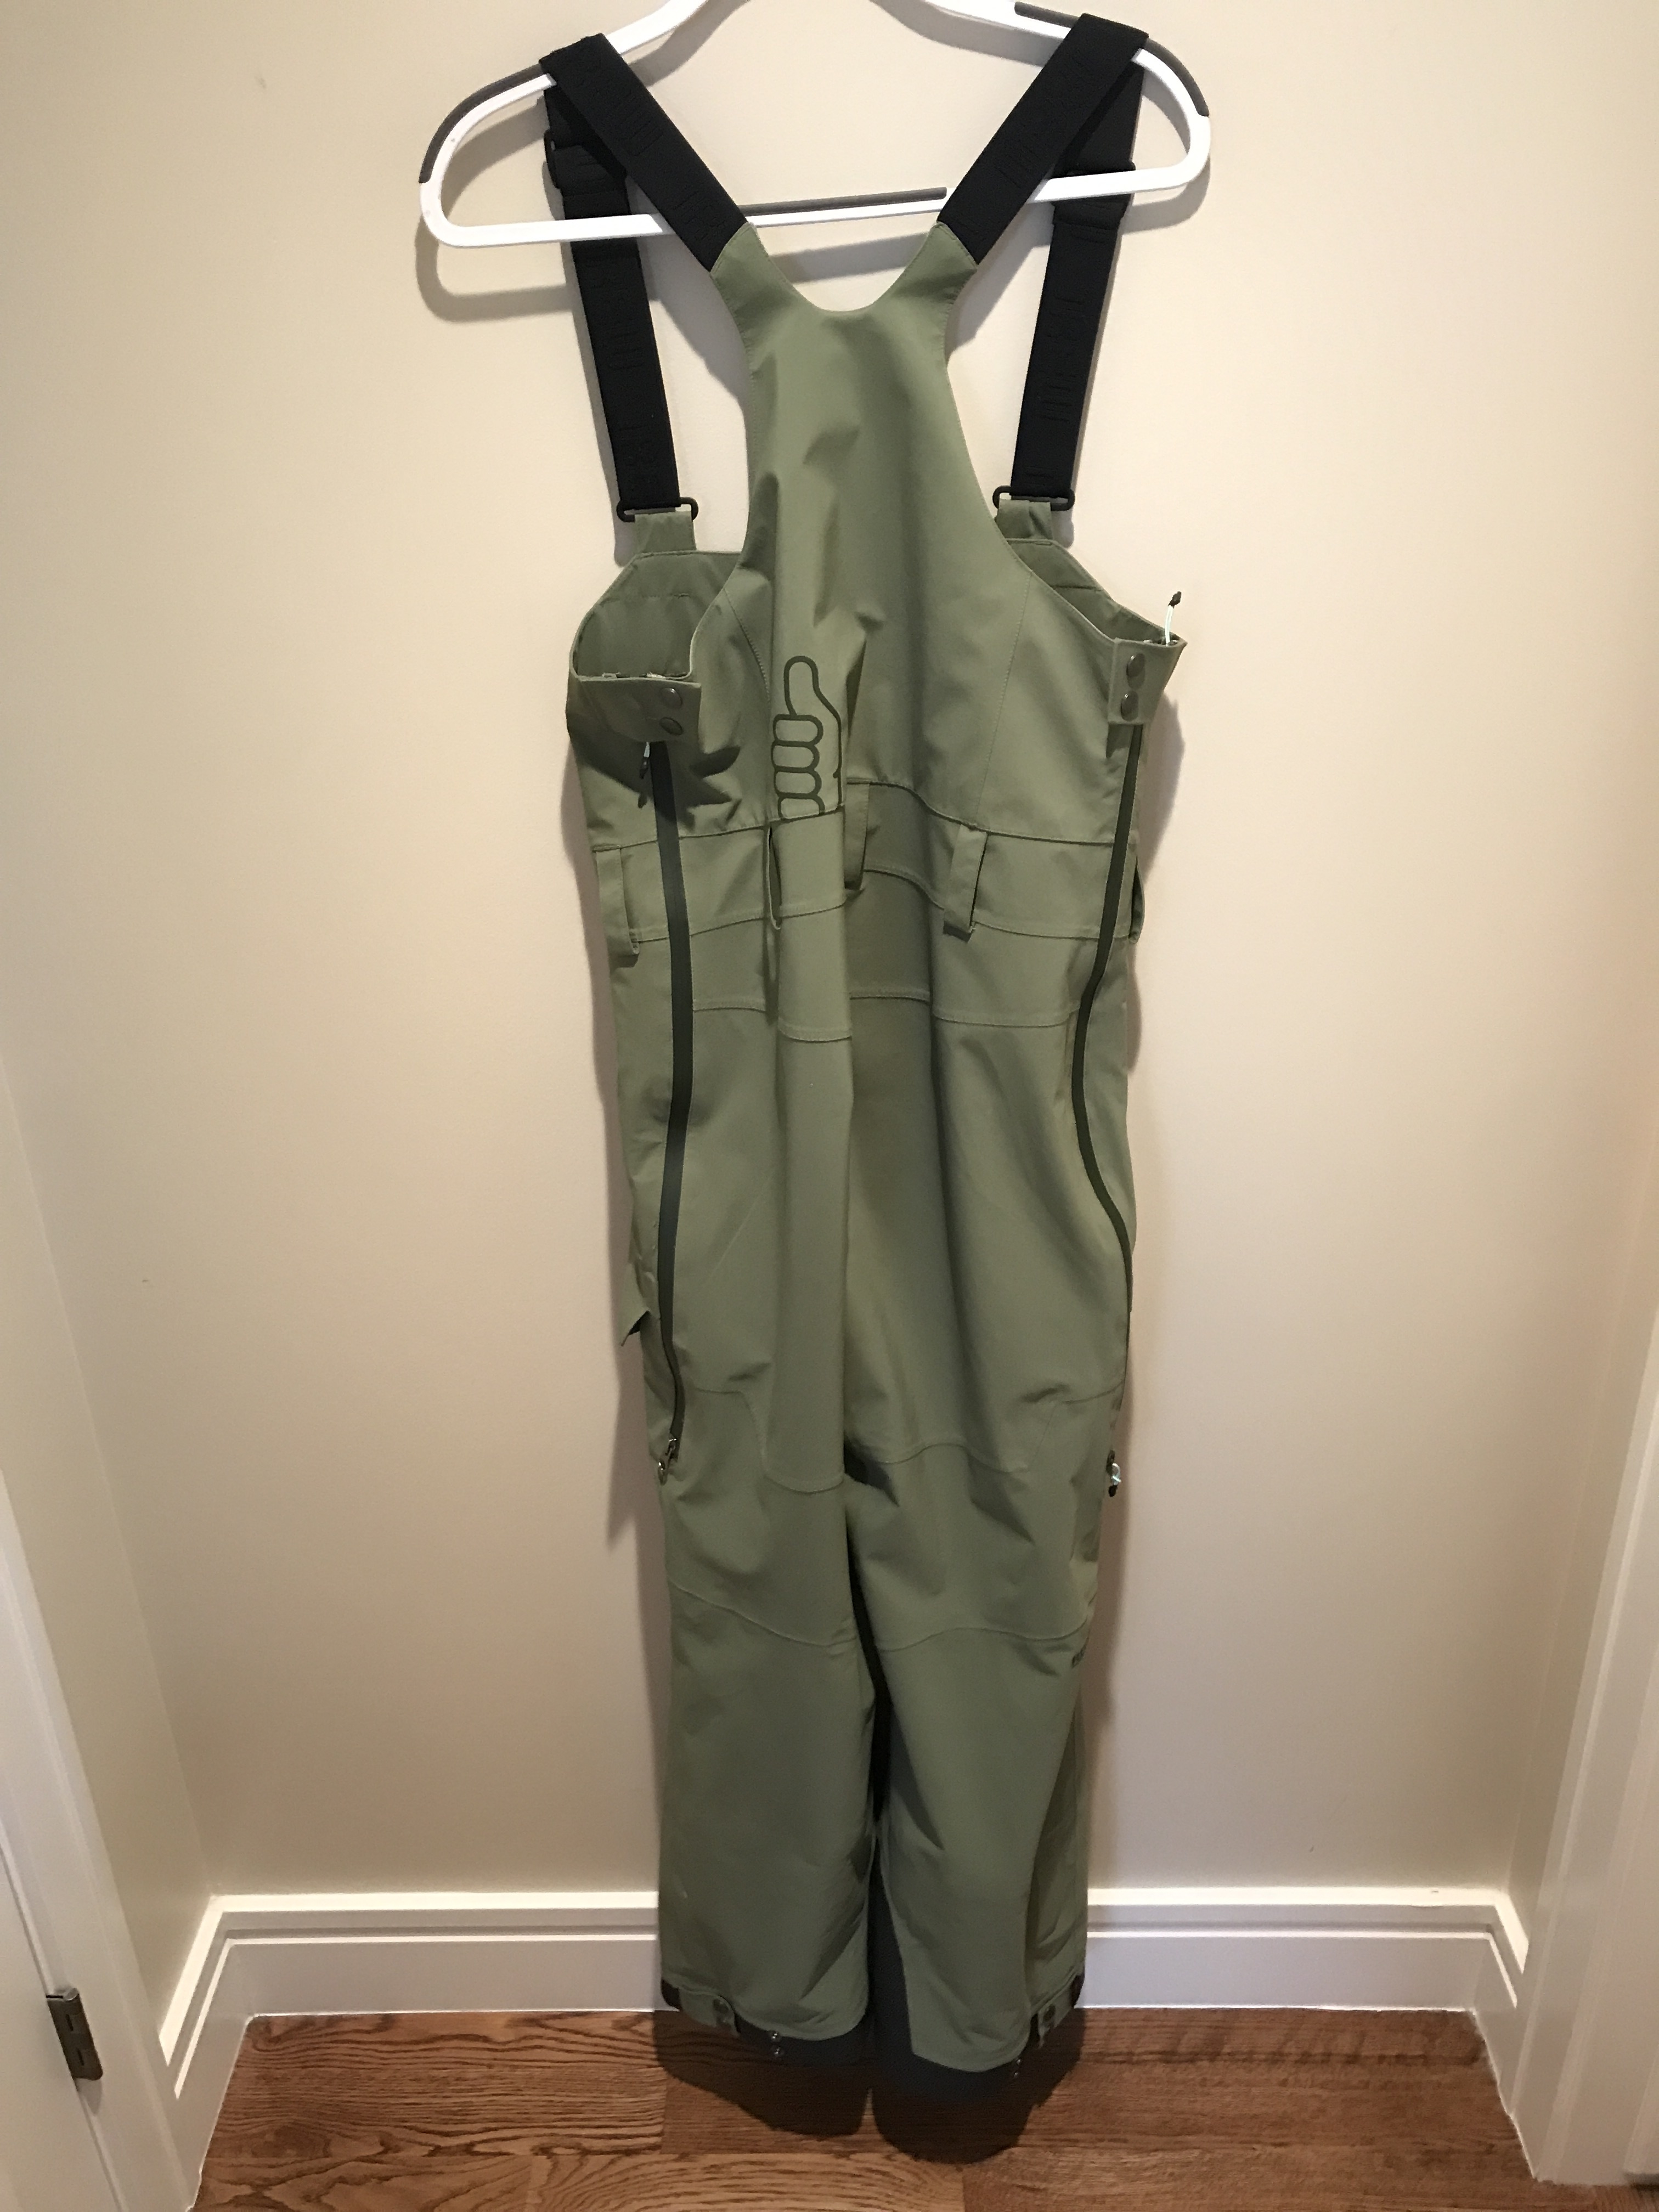 SOLD! TREW GEAR Men's Bibs (size: small, color: green) - Sell and Trade ...